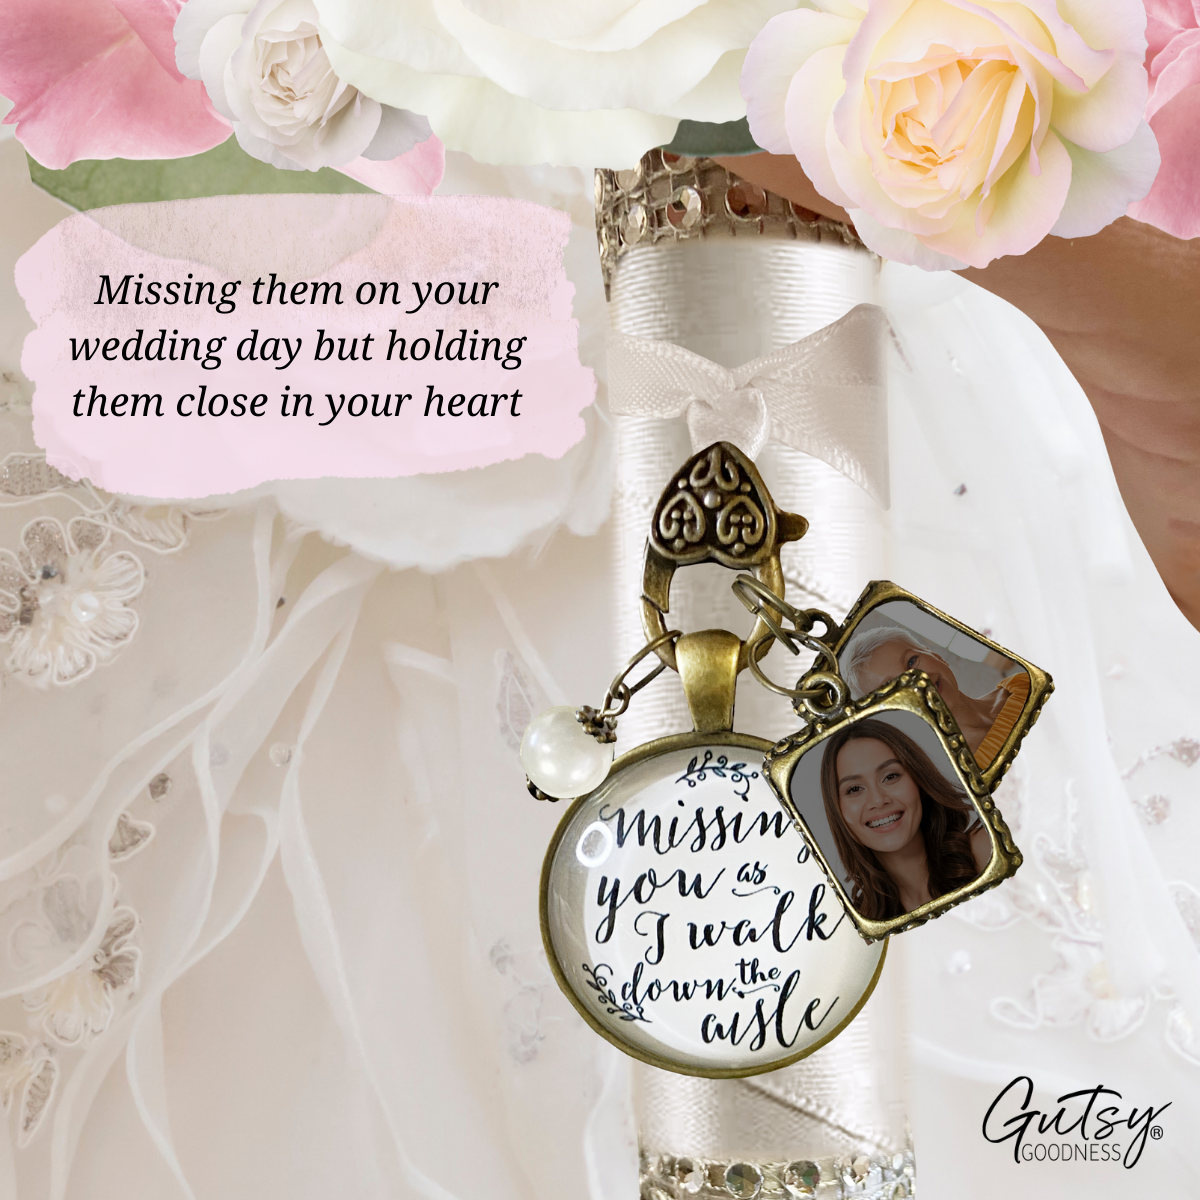 Bouquet Wedding Charm 2 Frames Missing You Memorial White Remembrance Photo Jewelry - Gutsy Goodness